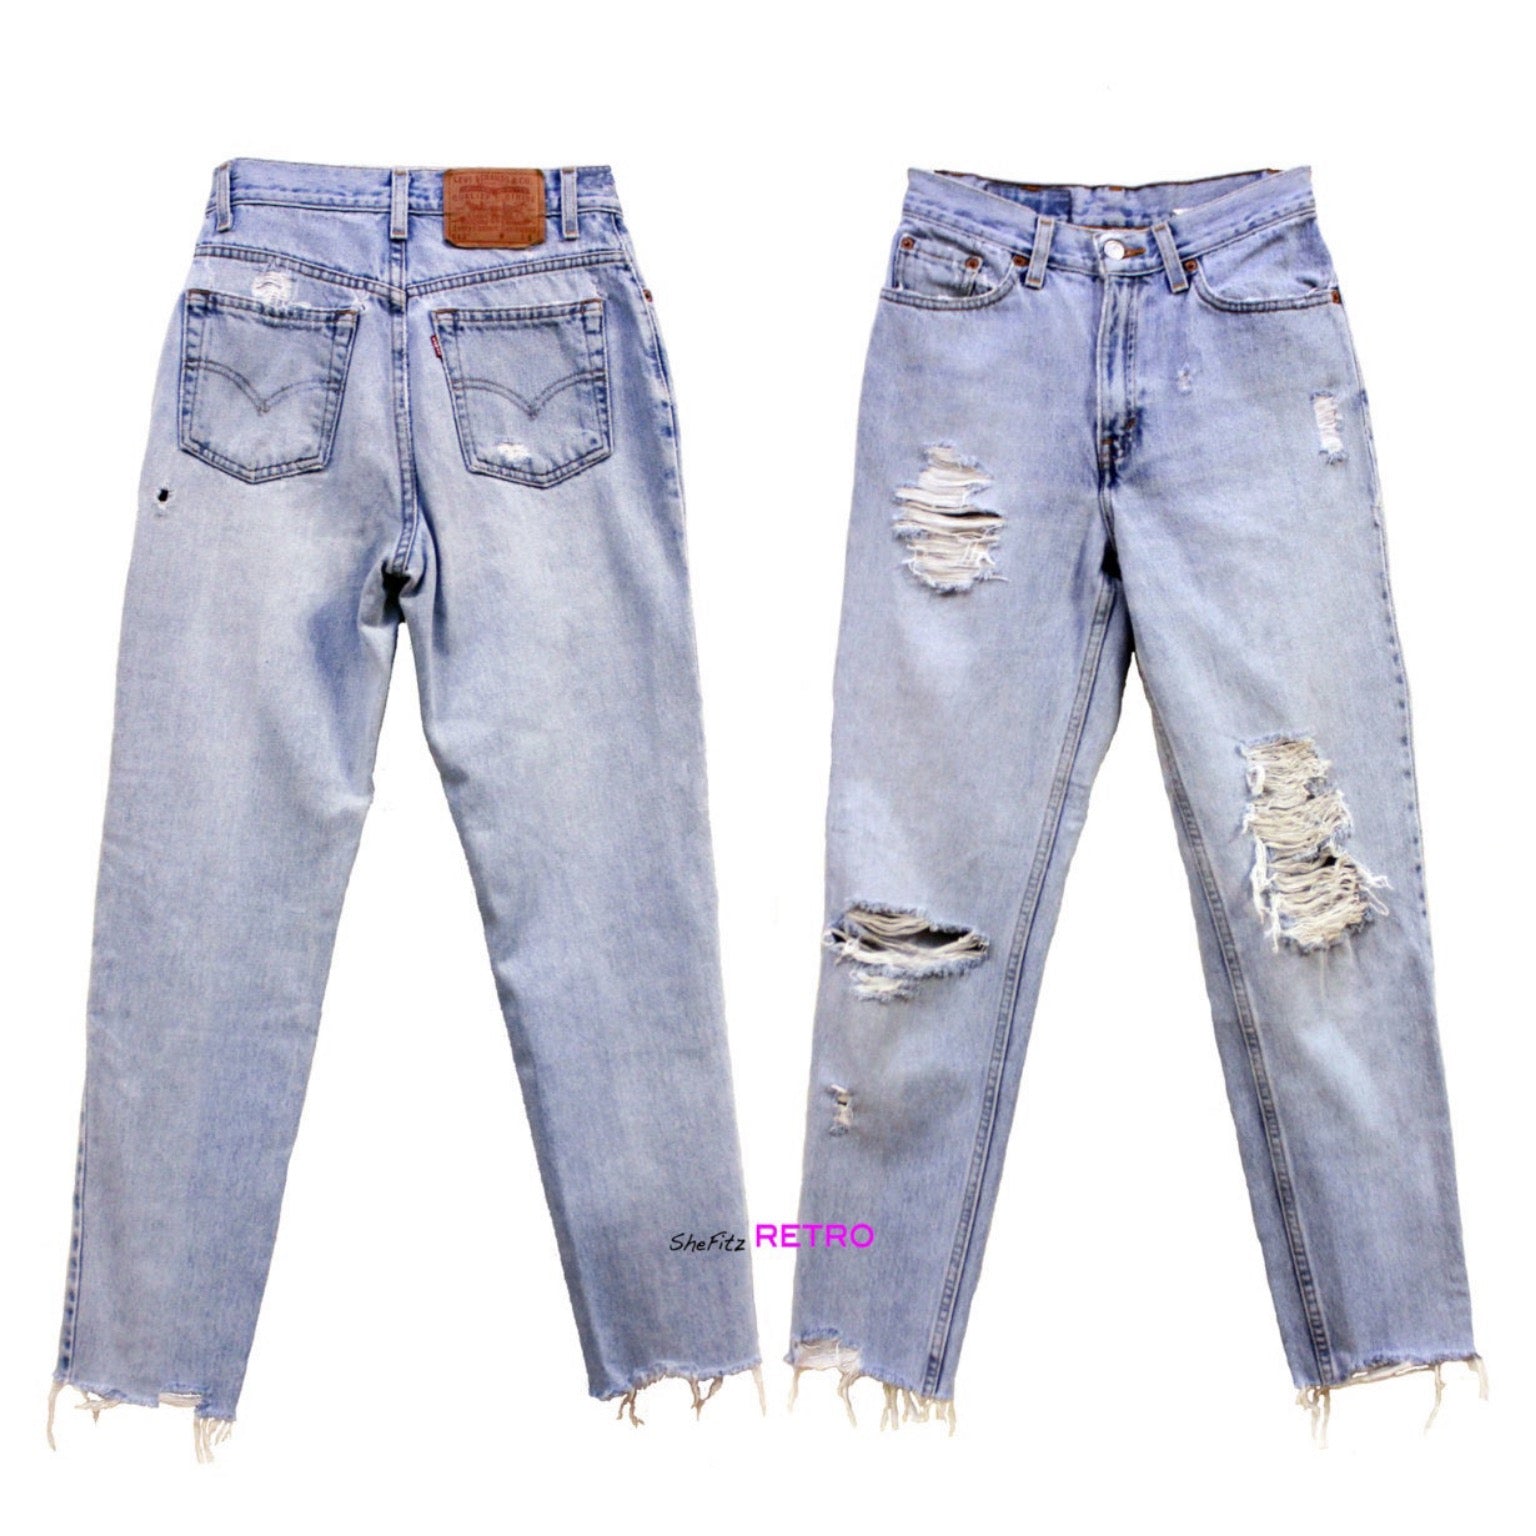 Made To Order Vintage High Waisted Distressed Levis Cut Off Ankle Hem Jeans